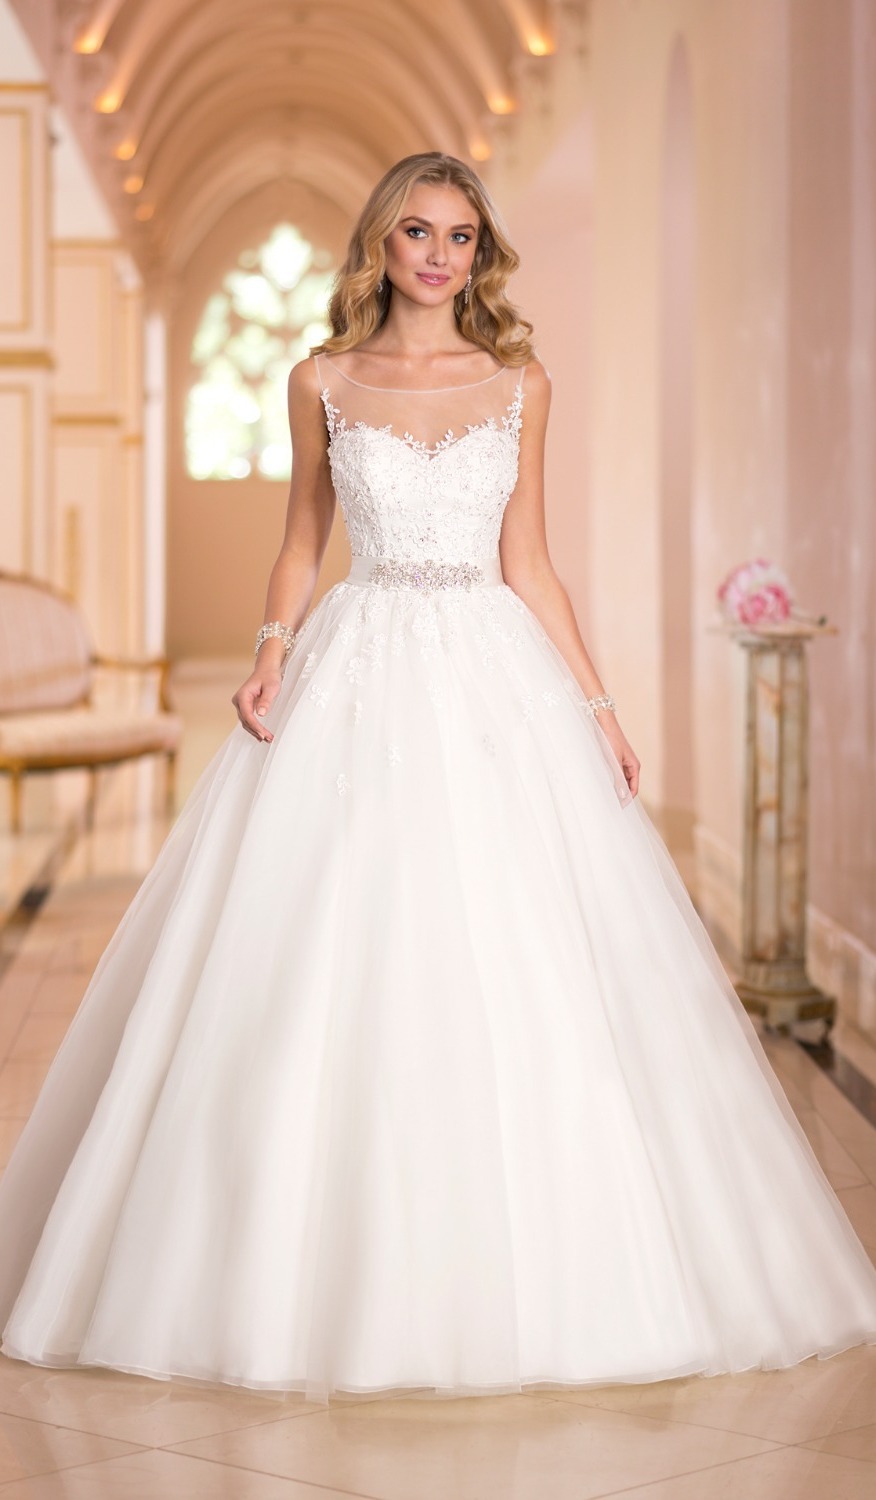 Sweetheart Wedding Dresses with Straps